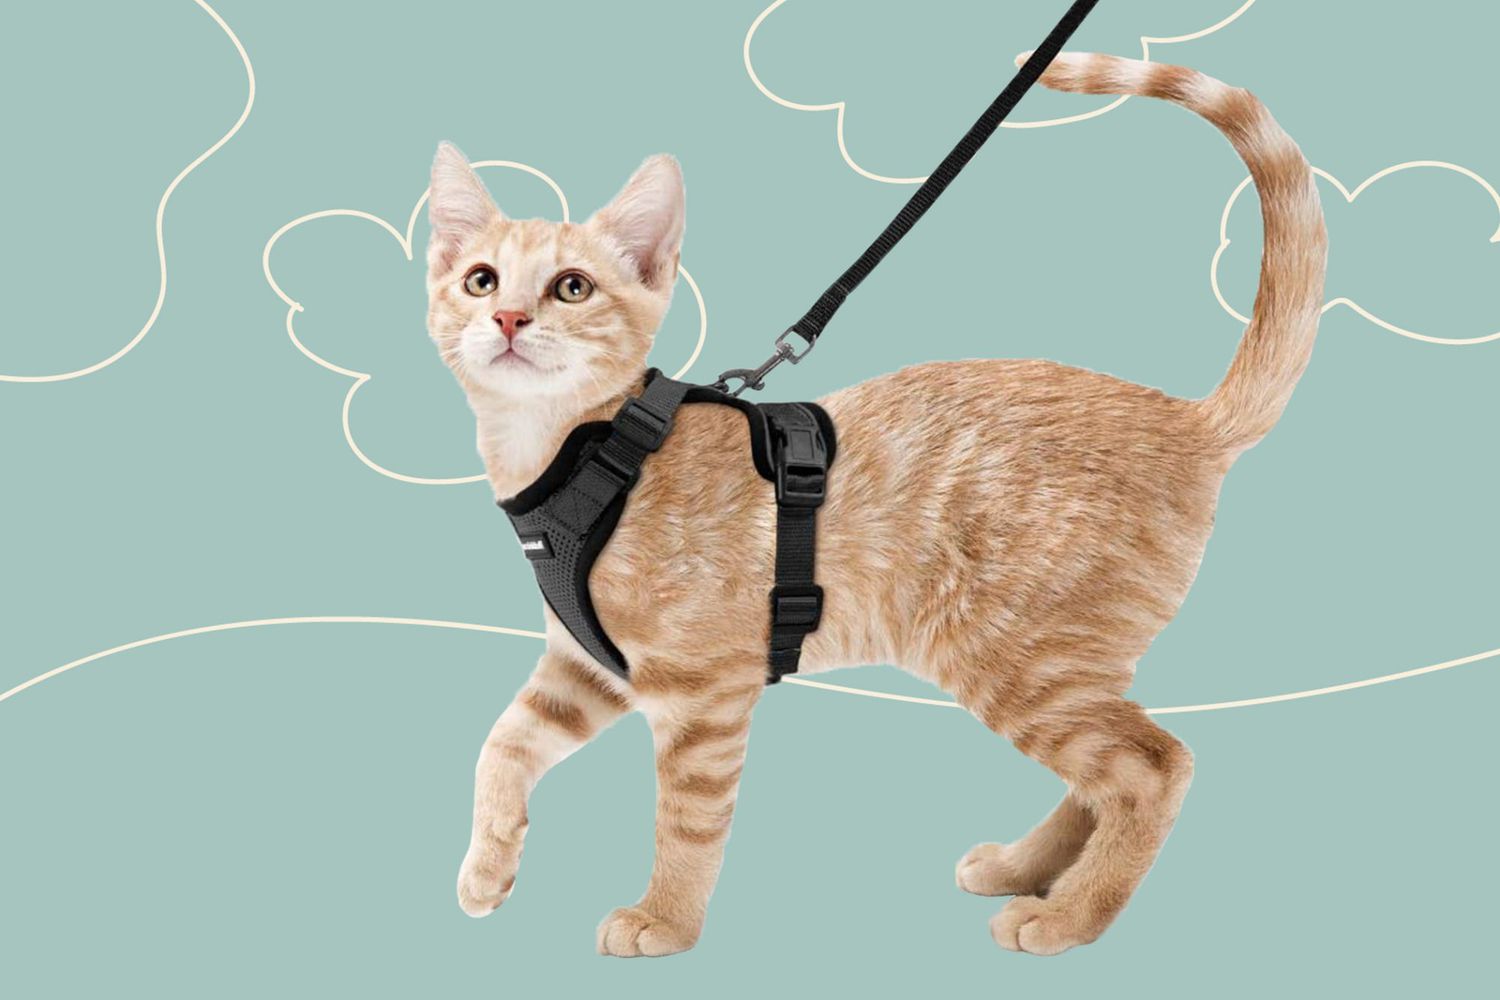 Green Red Dingo Classic Cat Harness and Lead Combo